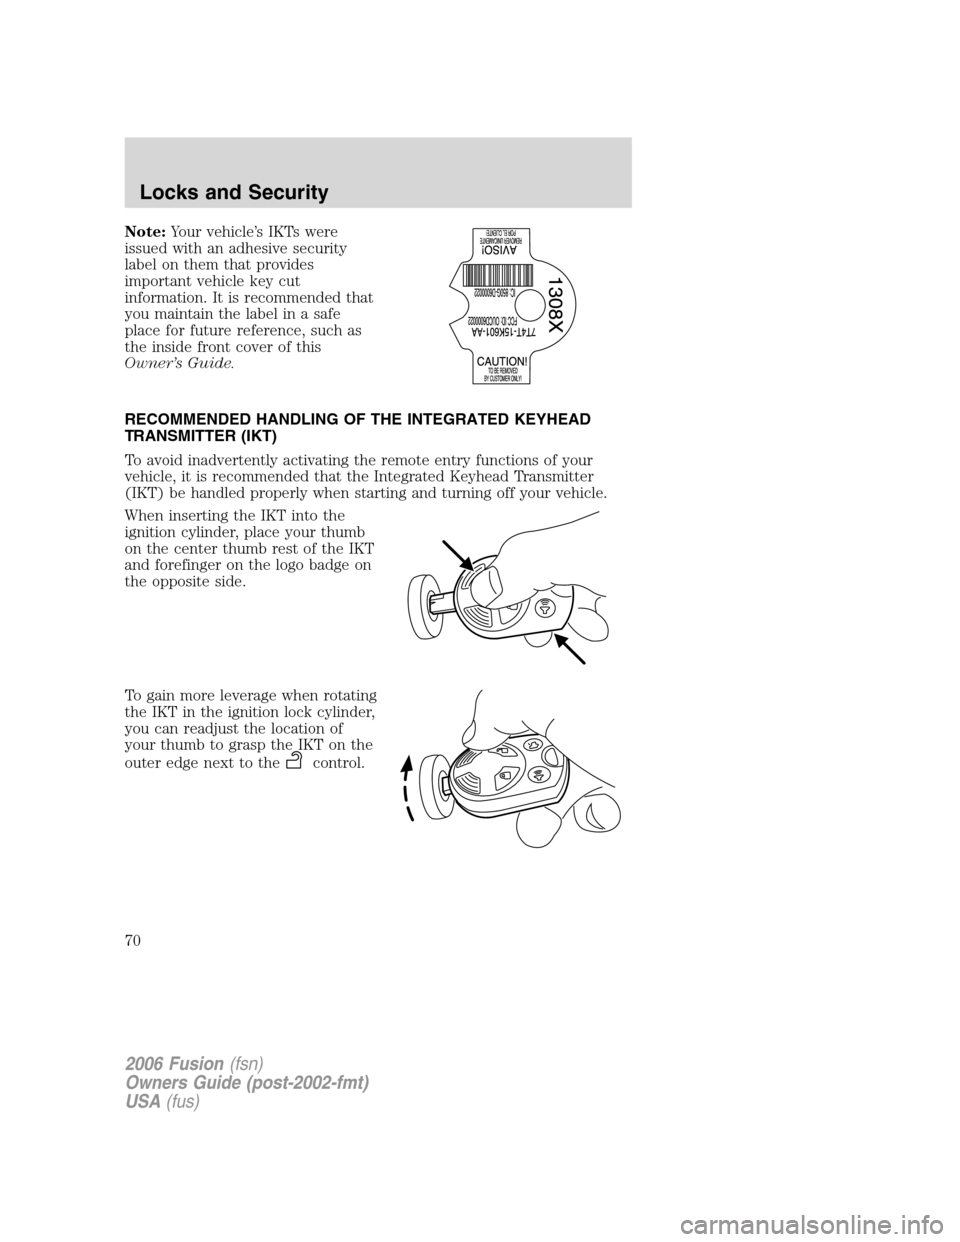 FORD FUSION (AMERICAS) 2006 1.G Repair Manual Note:Your vehicle’s IKTs were
issued with an adhesive security
label on them that provides
important vehicle key cut
information. It is recommended that
you maintain the label in a safe
place for fu